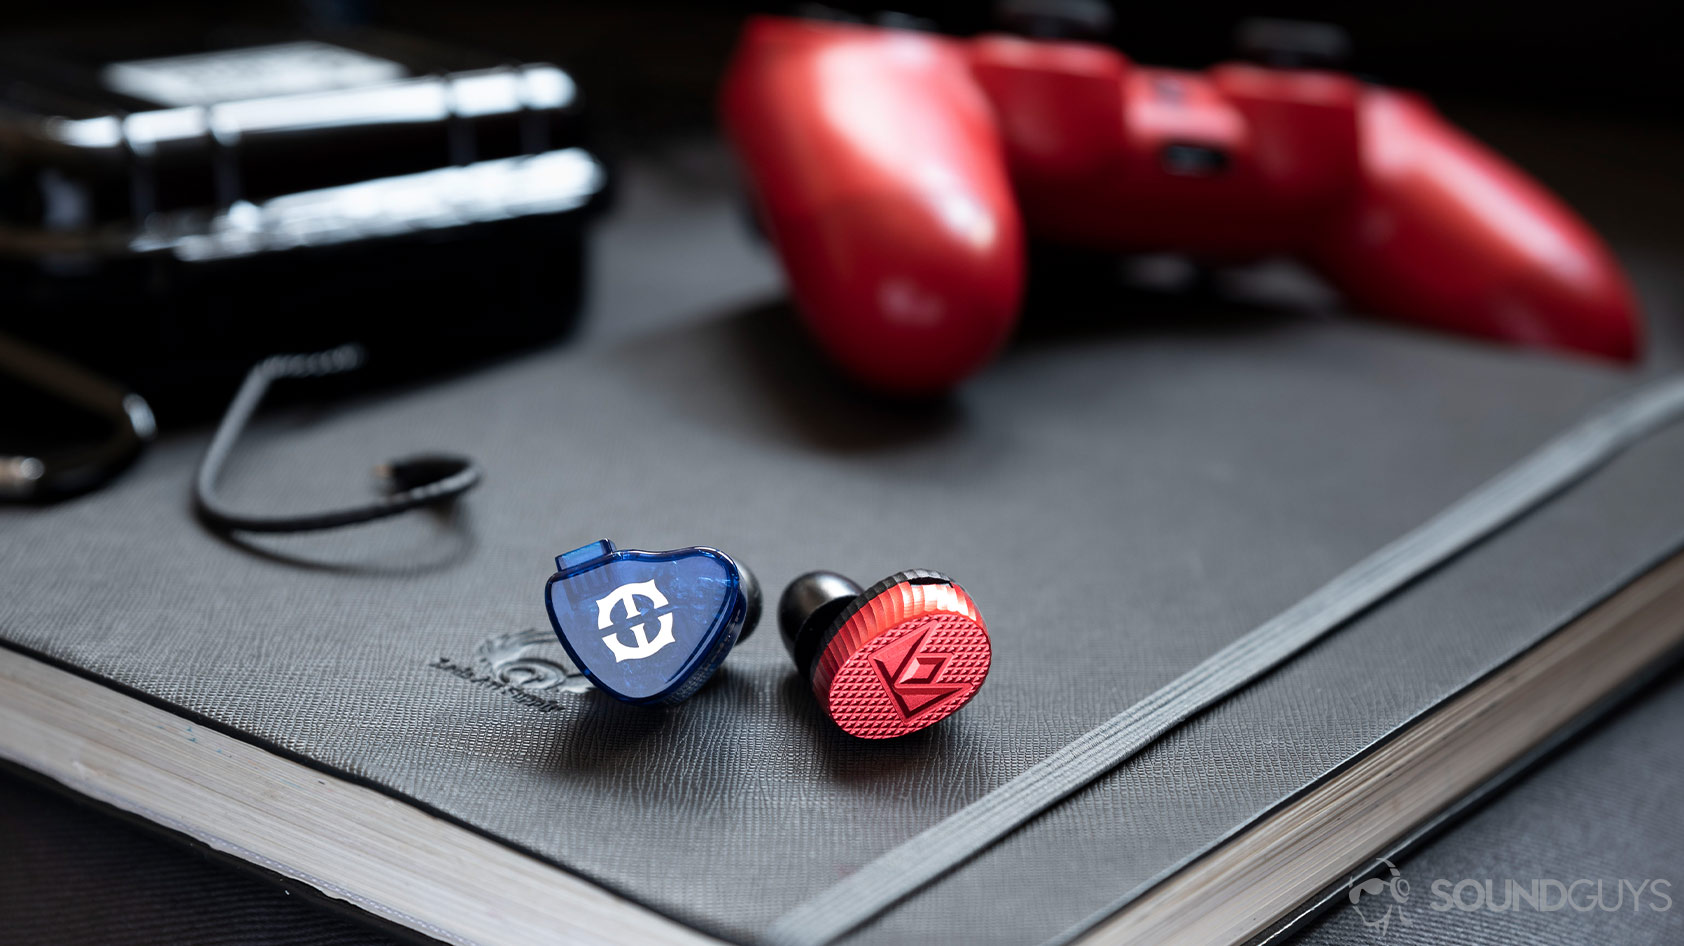 A photo of the Massdrop x Empire Ears Zeus and Massdrop x Noble Audio Kaiser 10 in-ear monitors next to each other with a PS4 controller in the background.